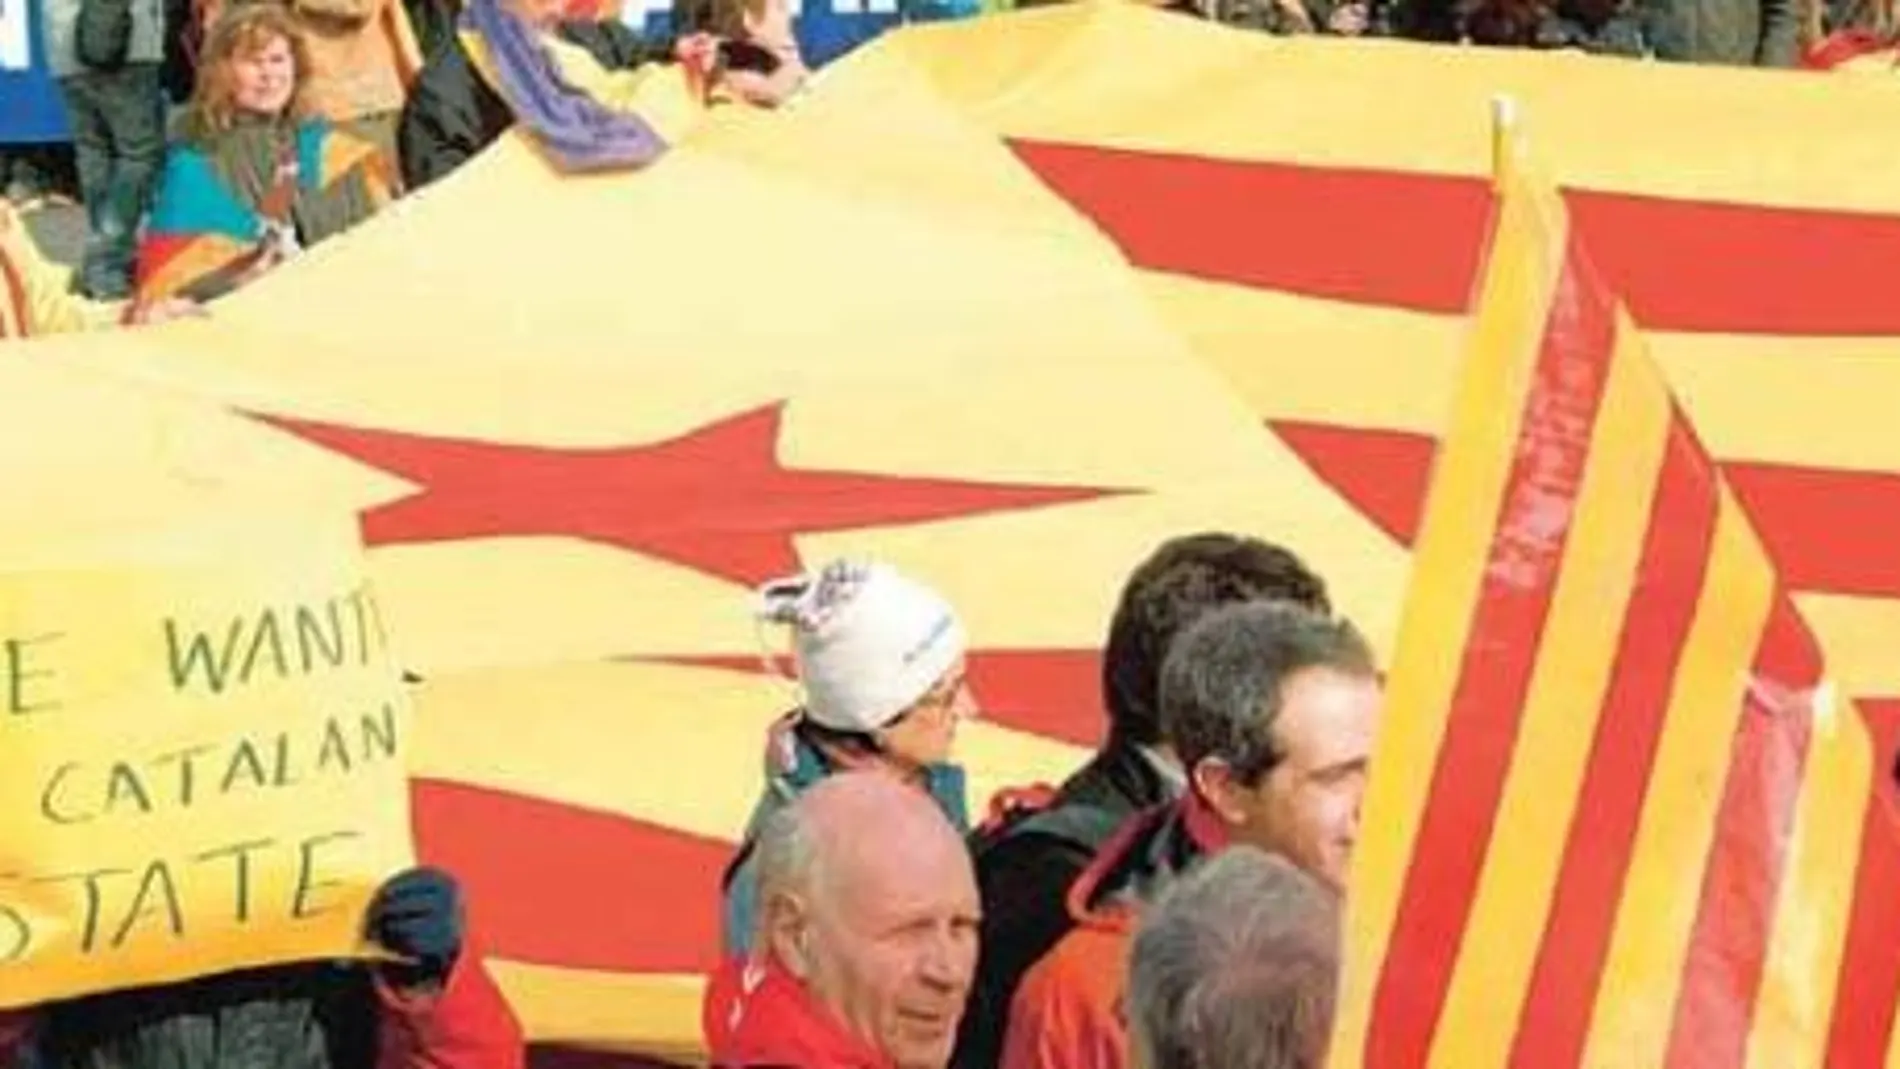 «We want a catalan state»